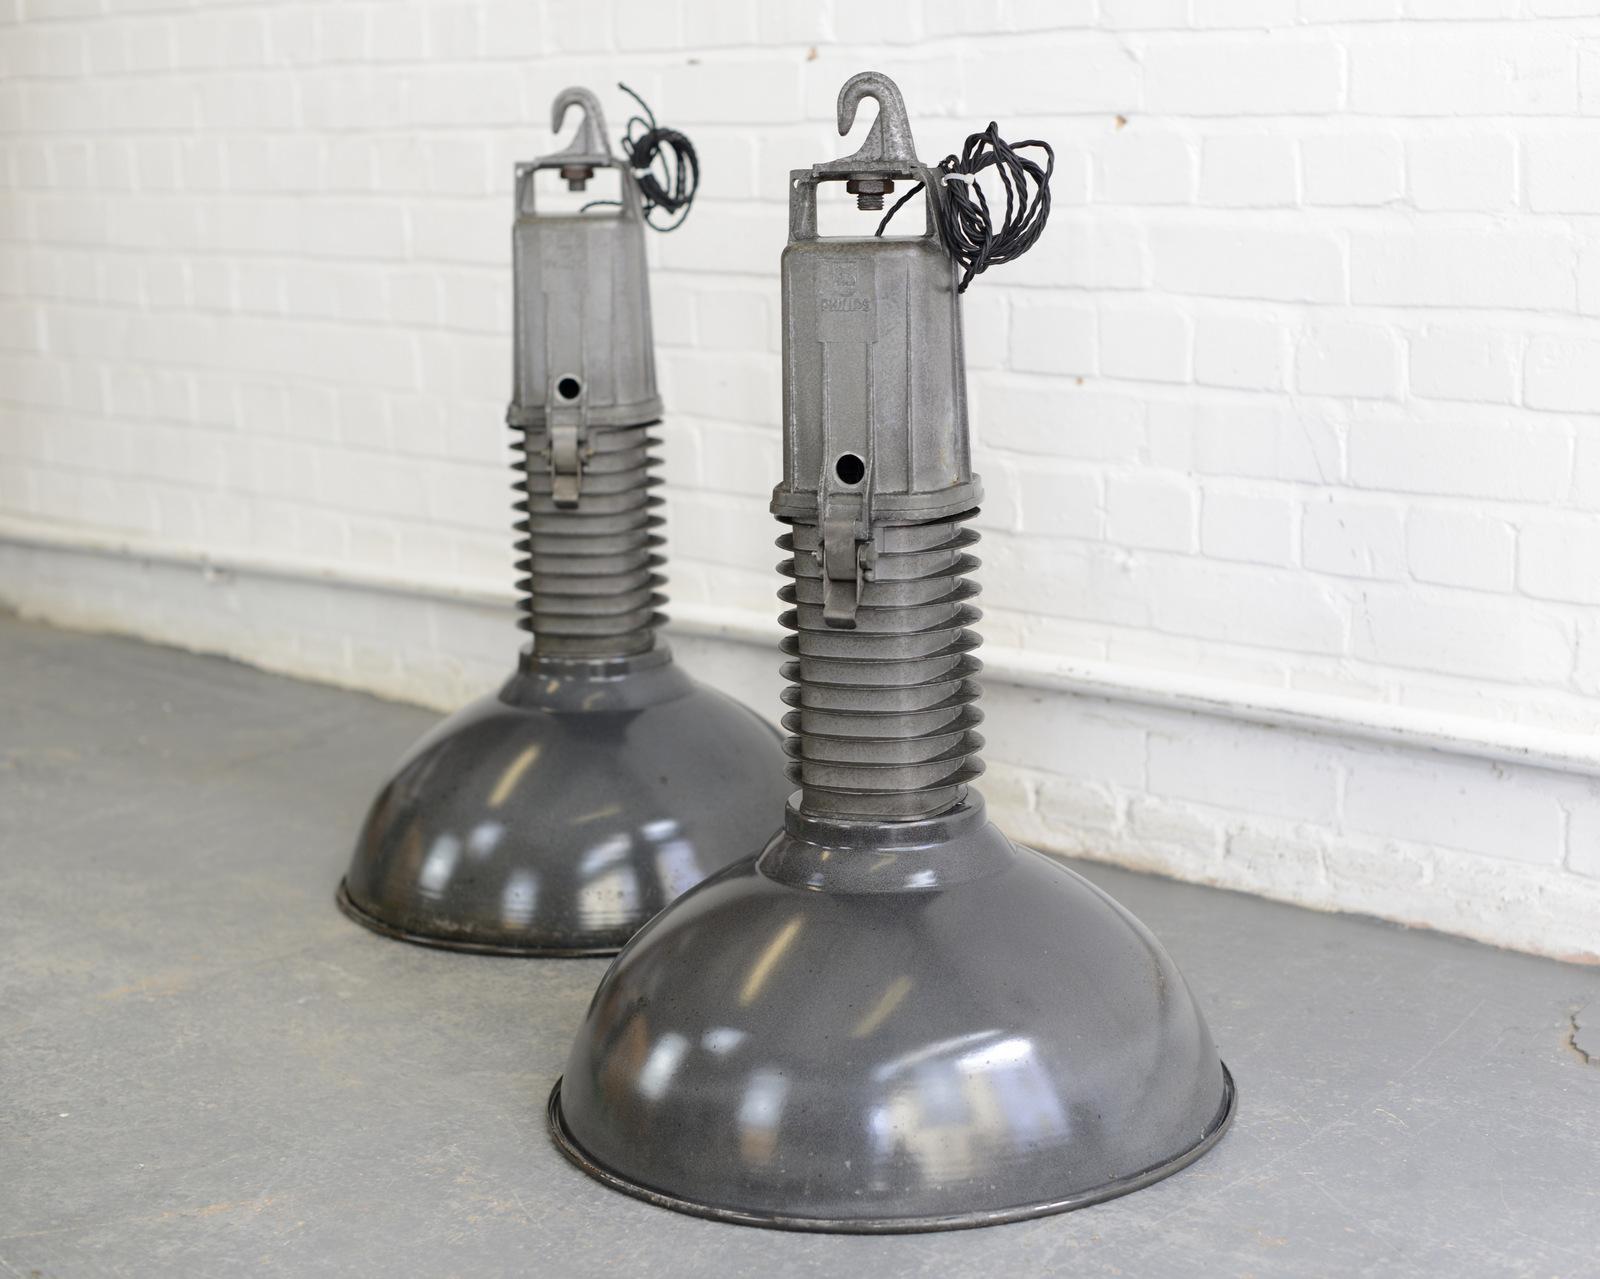 Large Dutch Industrial Lights By Phillips, circa 1950s.

Product code #OA851

- Worldwide shipping
- All prices including VAT
- Price is per light
- Vitreous black enamel shades
- Cast aluminium finned tops
- Takes E27 fitting bulbs
-